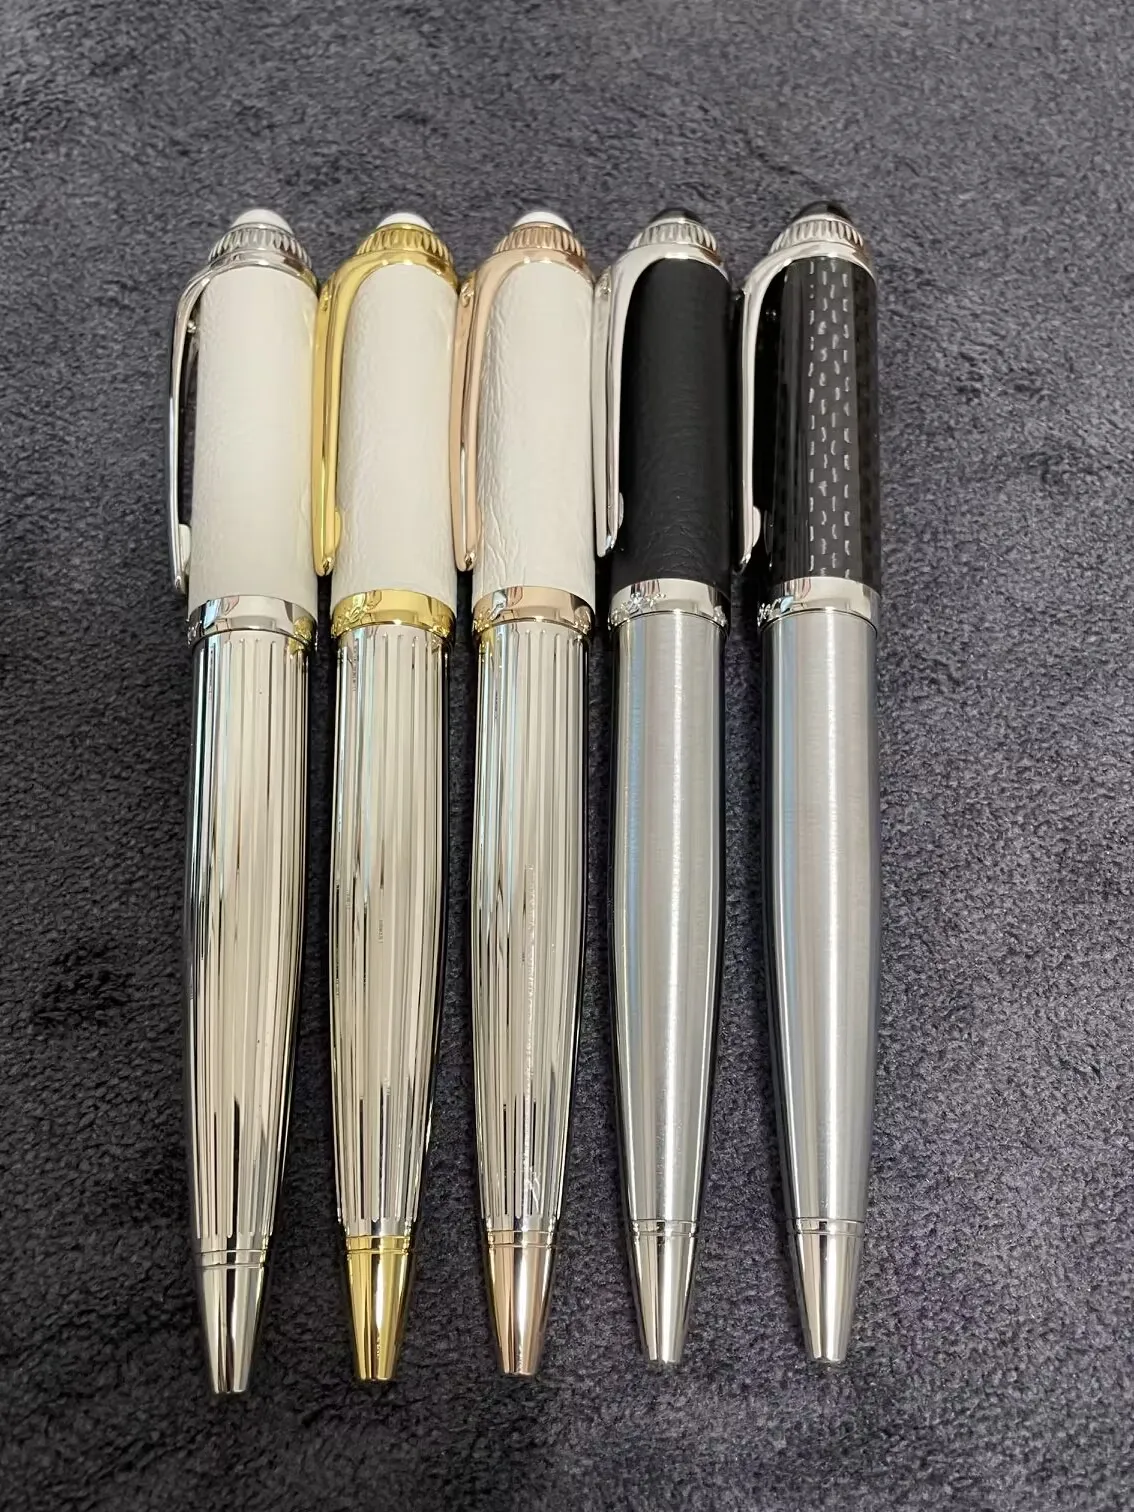 

Deluxe CT R series ballpoint pen black and white leather bucket and gem ballpoint pen high-grade silver gold decoration writing